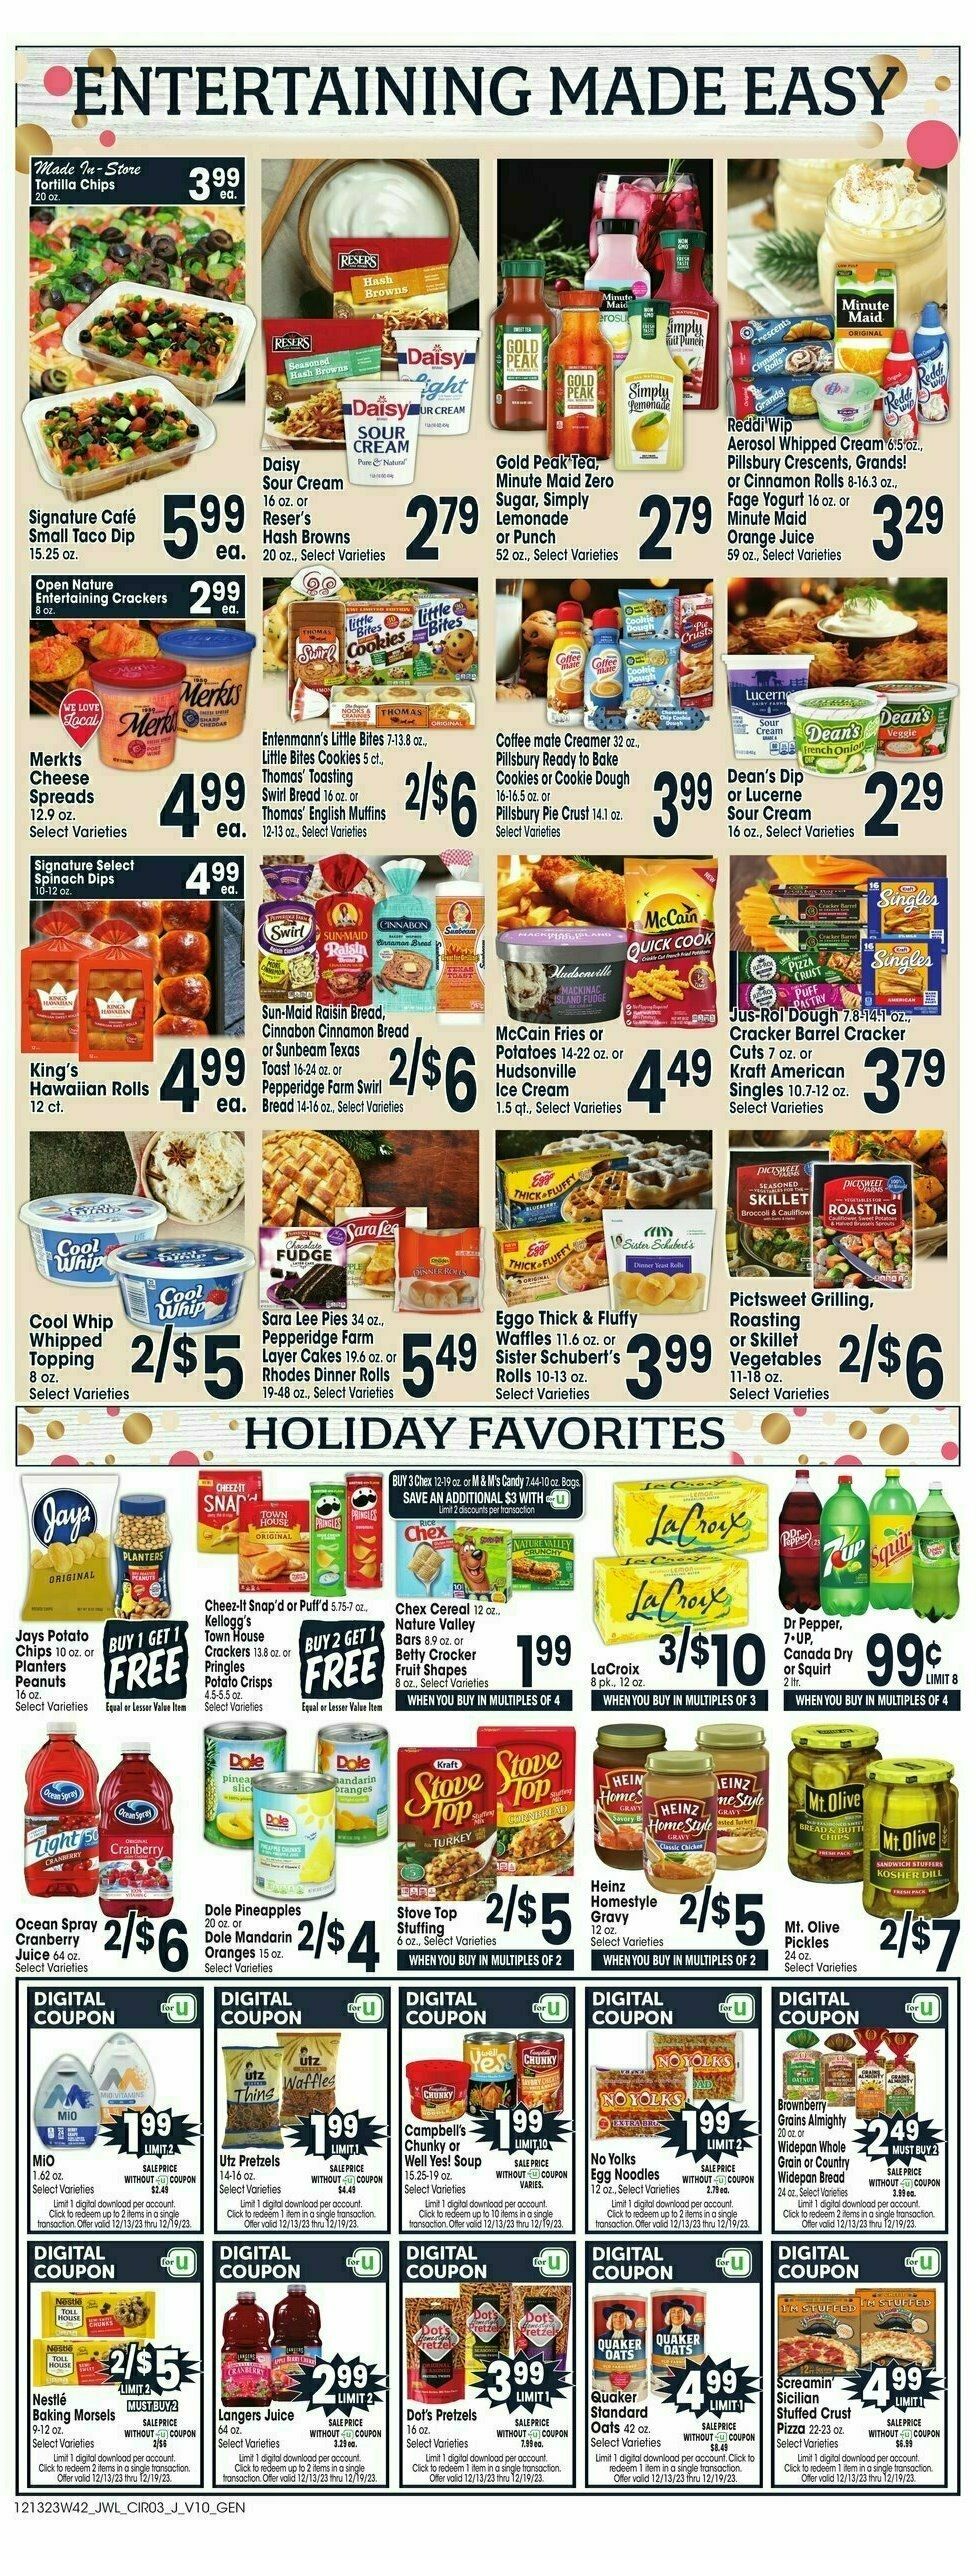 Jewel Osco Weekly Ad from December 13